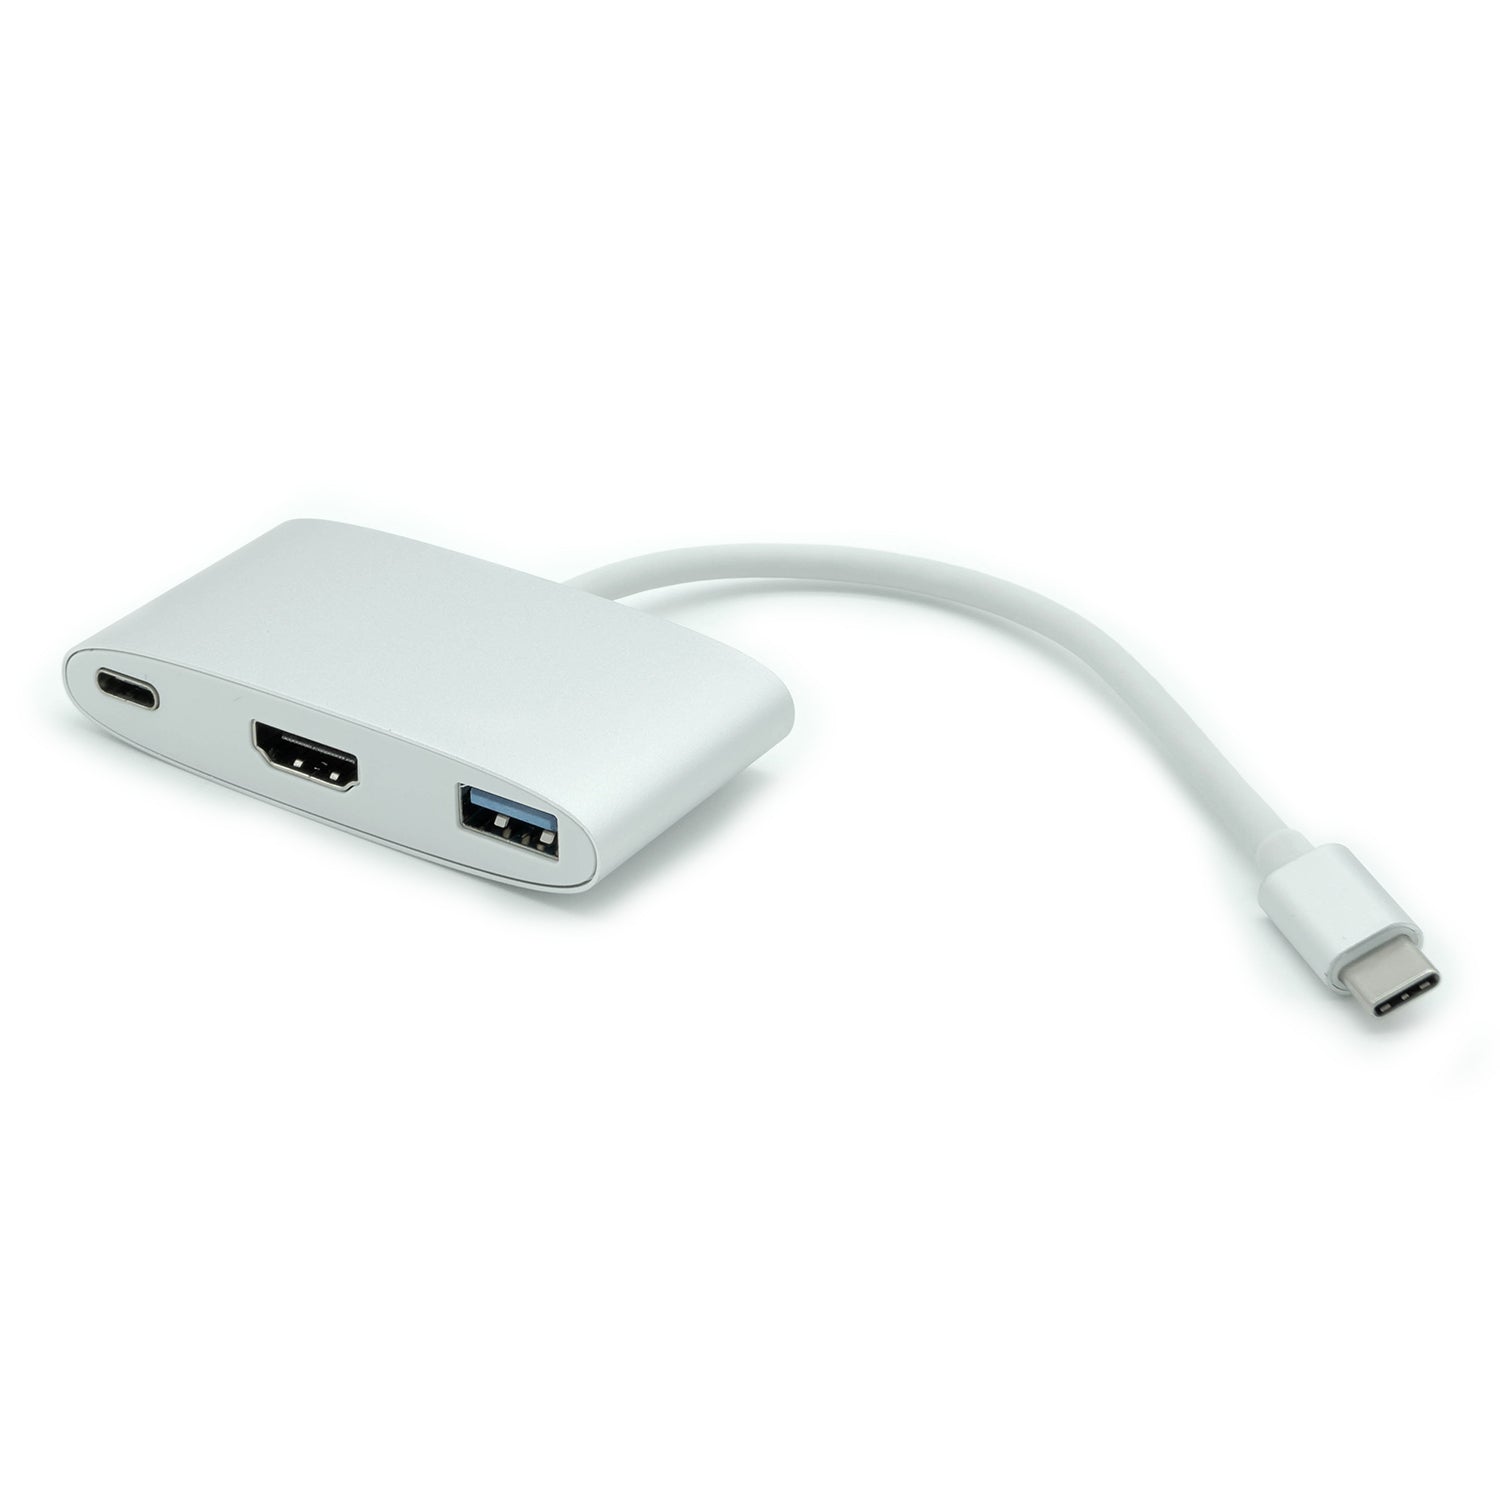 USB Type-C to USB3 Hub and HDMI 4K Adapter